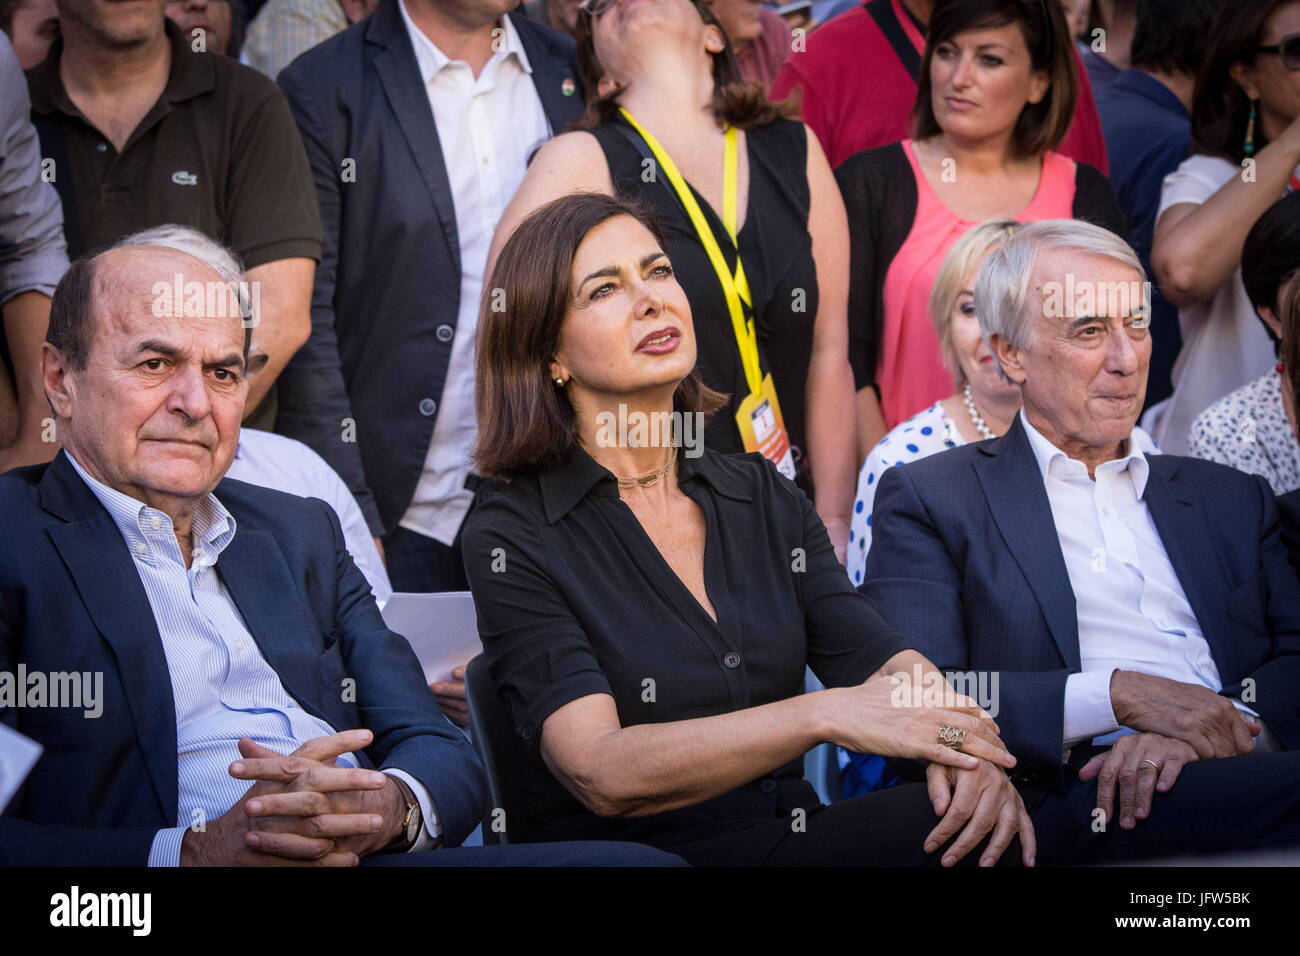 Rome, Italy. 01st July, 2017. Pierluigi Bersani (L), Giuliano Pisapia (R), and Laura Boldrini (C) during demonstration held by the group "Insieme" (Together), a new coalition of left-center parties in central Rome. The goal of the coalition "Insieme" is to build dialogue, autonomous from Democratic Party leader Matteo Renzi, but also to speak with the electors and to give the progressive electorate a reference. Credit: Andrea Ronchini/PacificPress/Alamy Live News Stock Photo